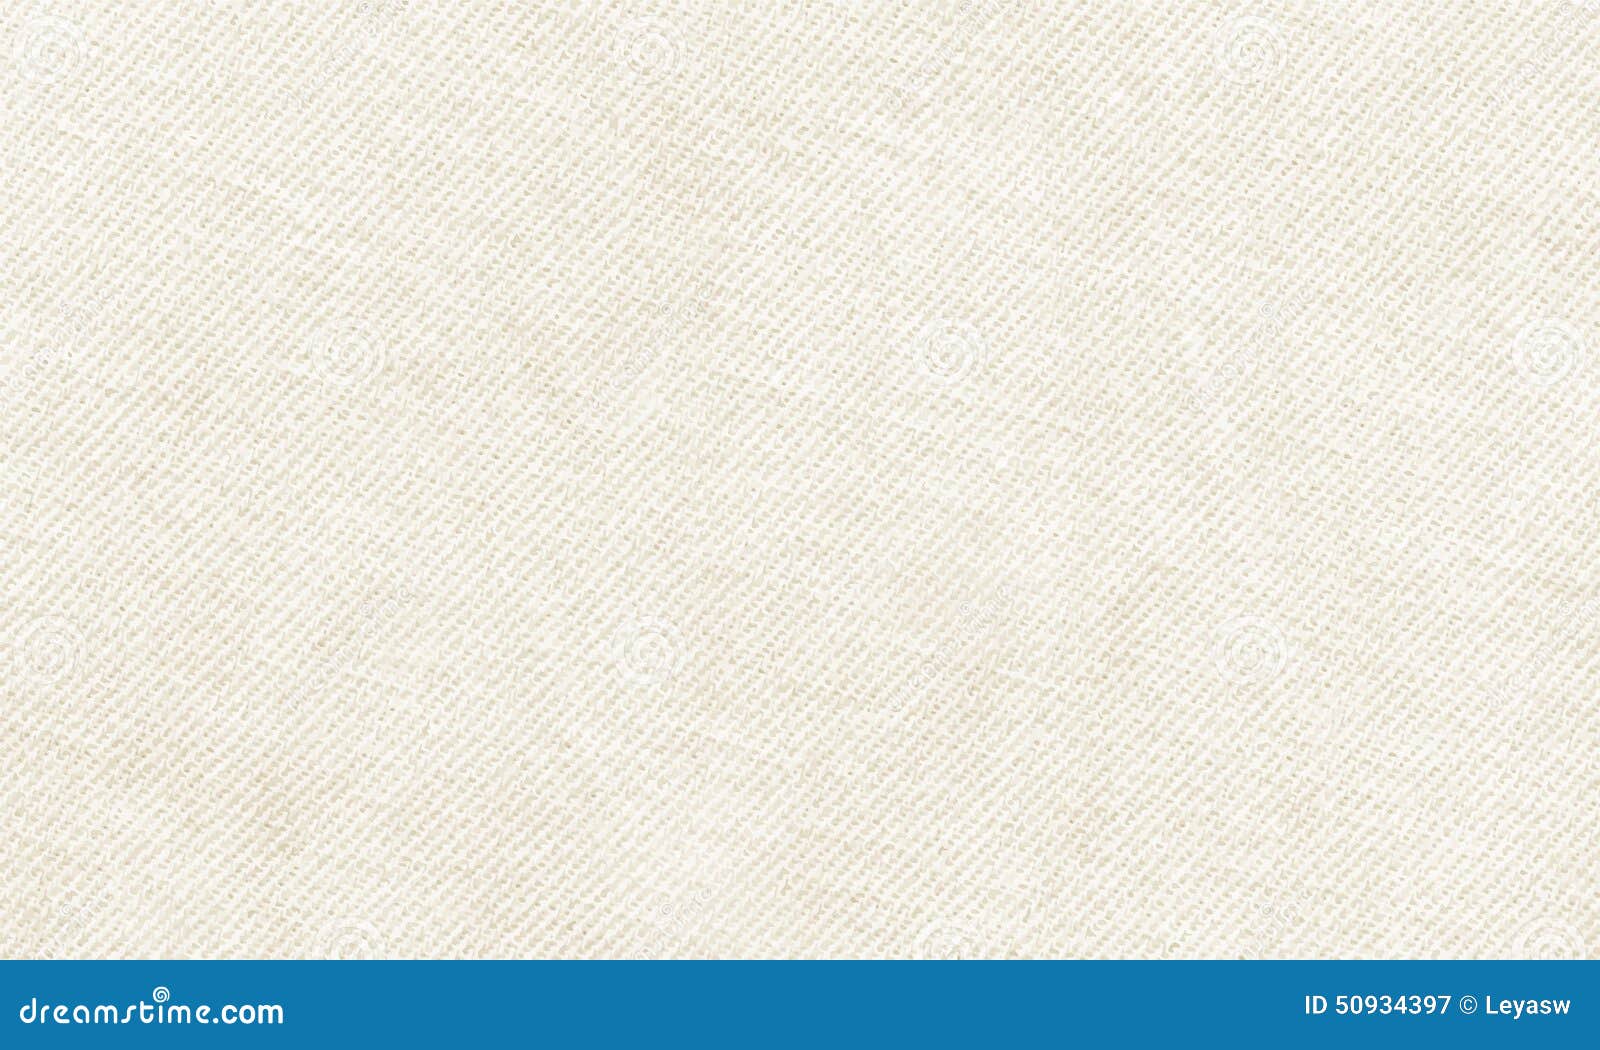 horizontal white canvas material to use as background or texture